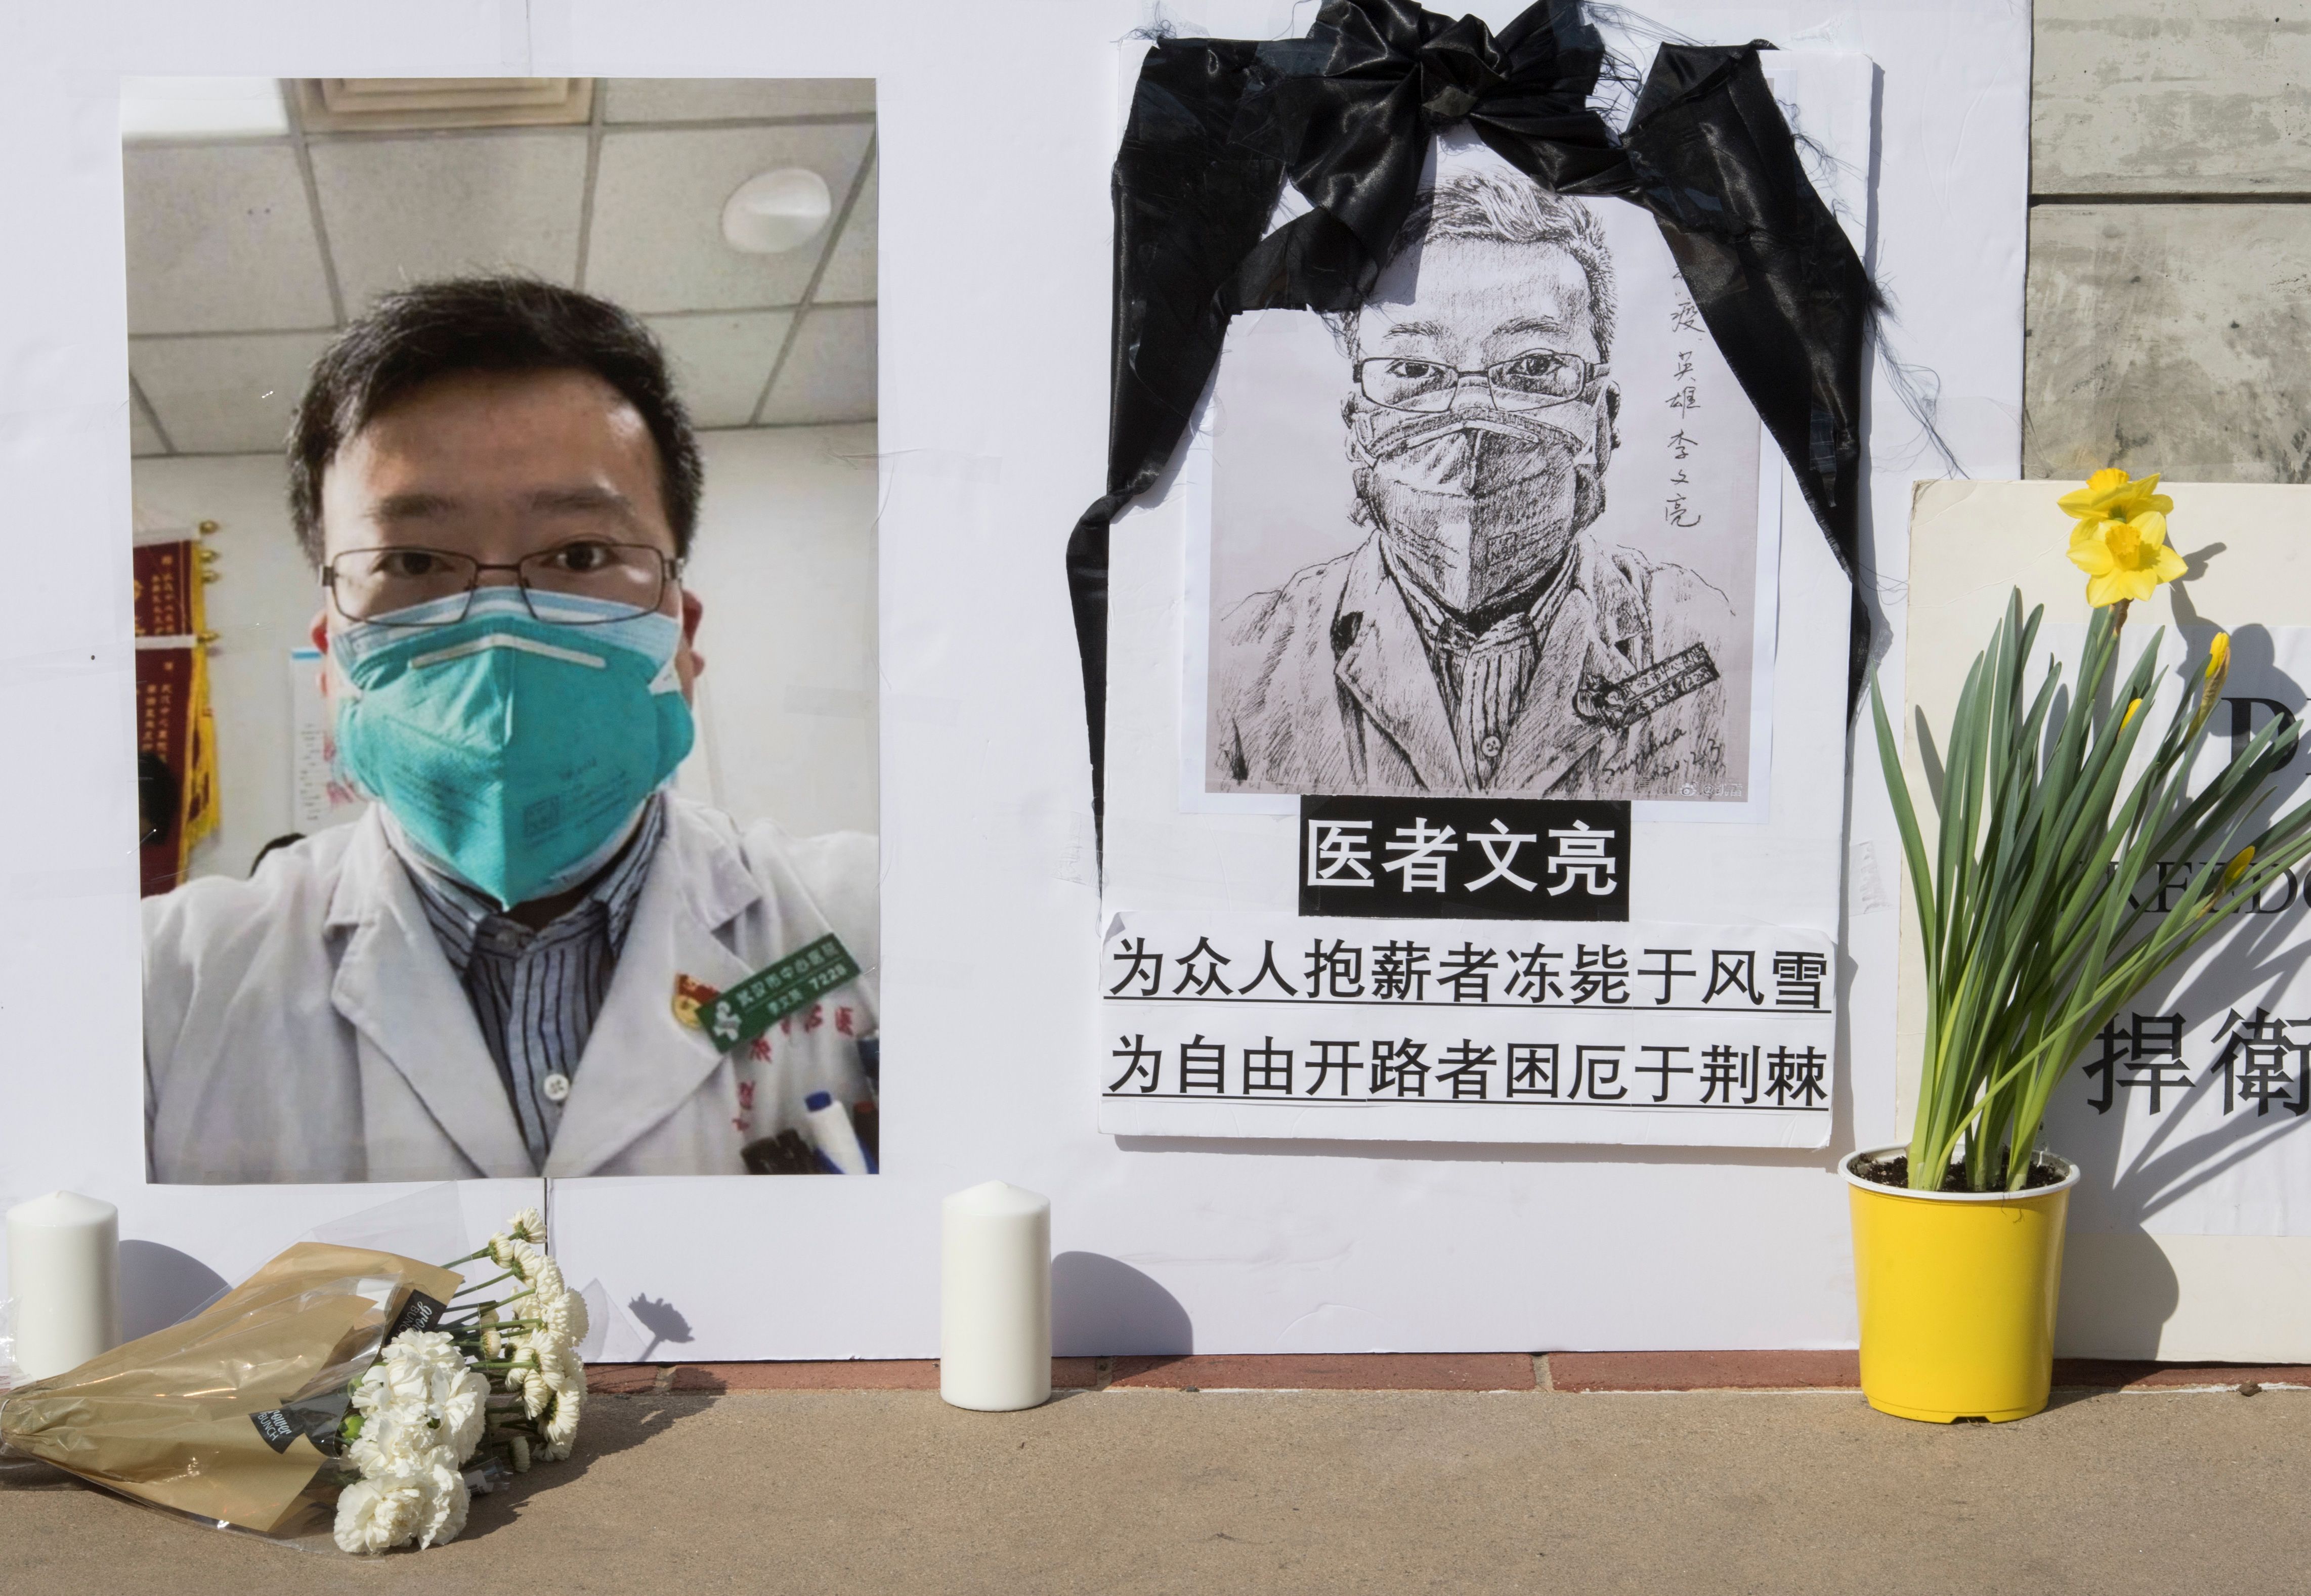 A memorial for Dr Li Wenliang, who was the whistleblower of the Coronavirus